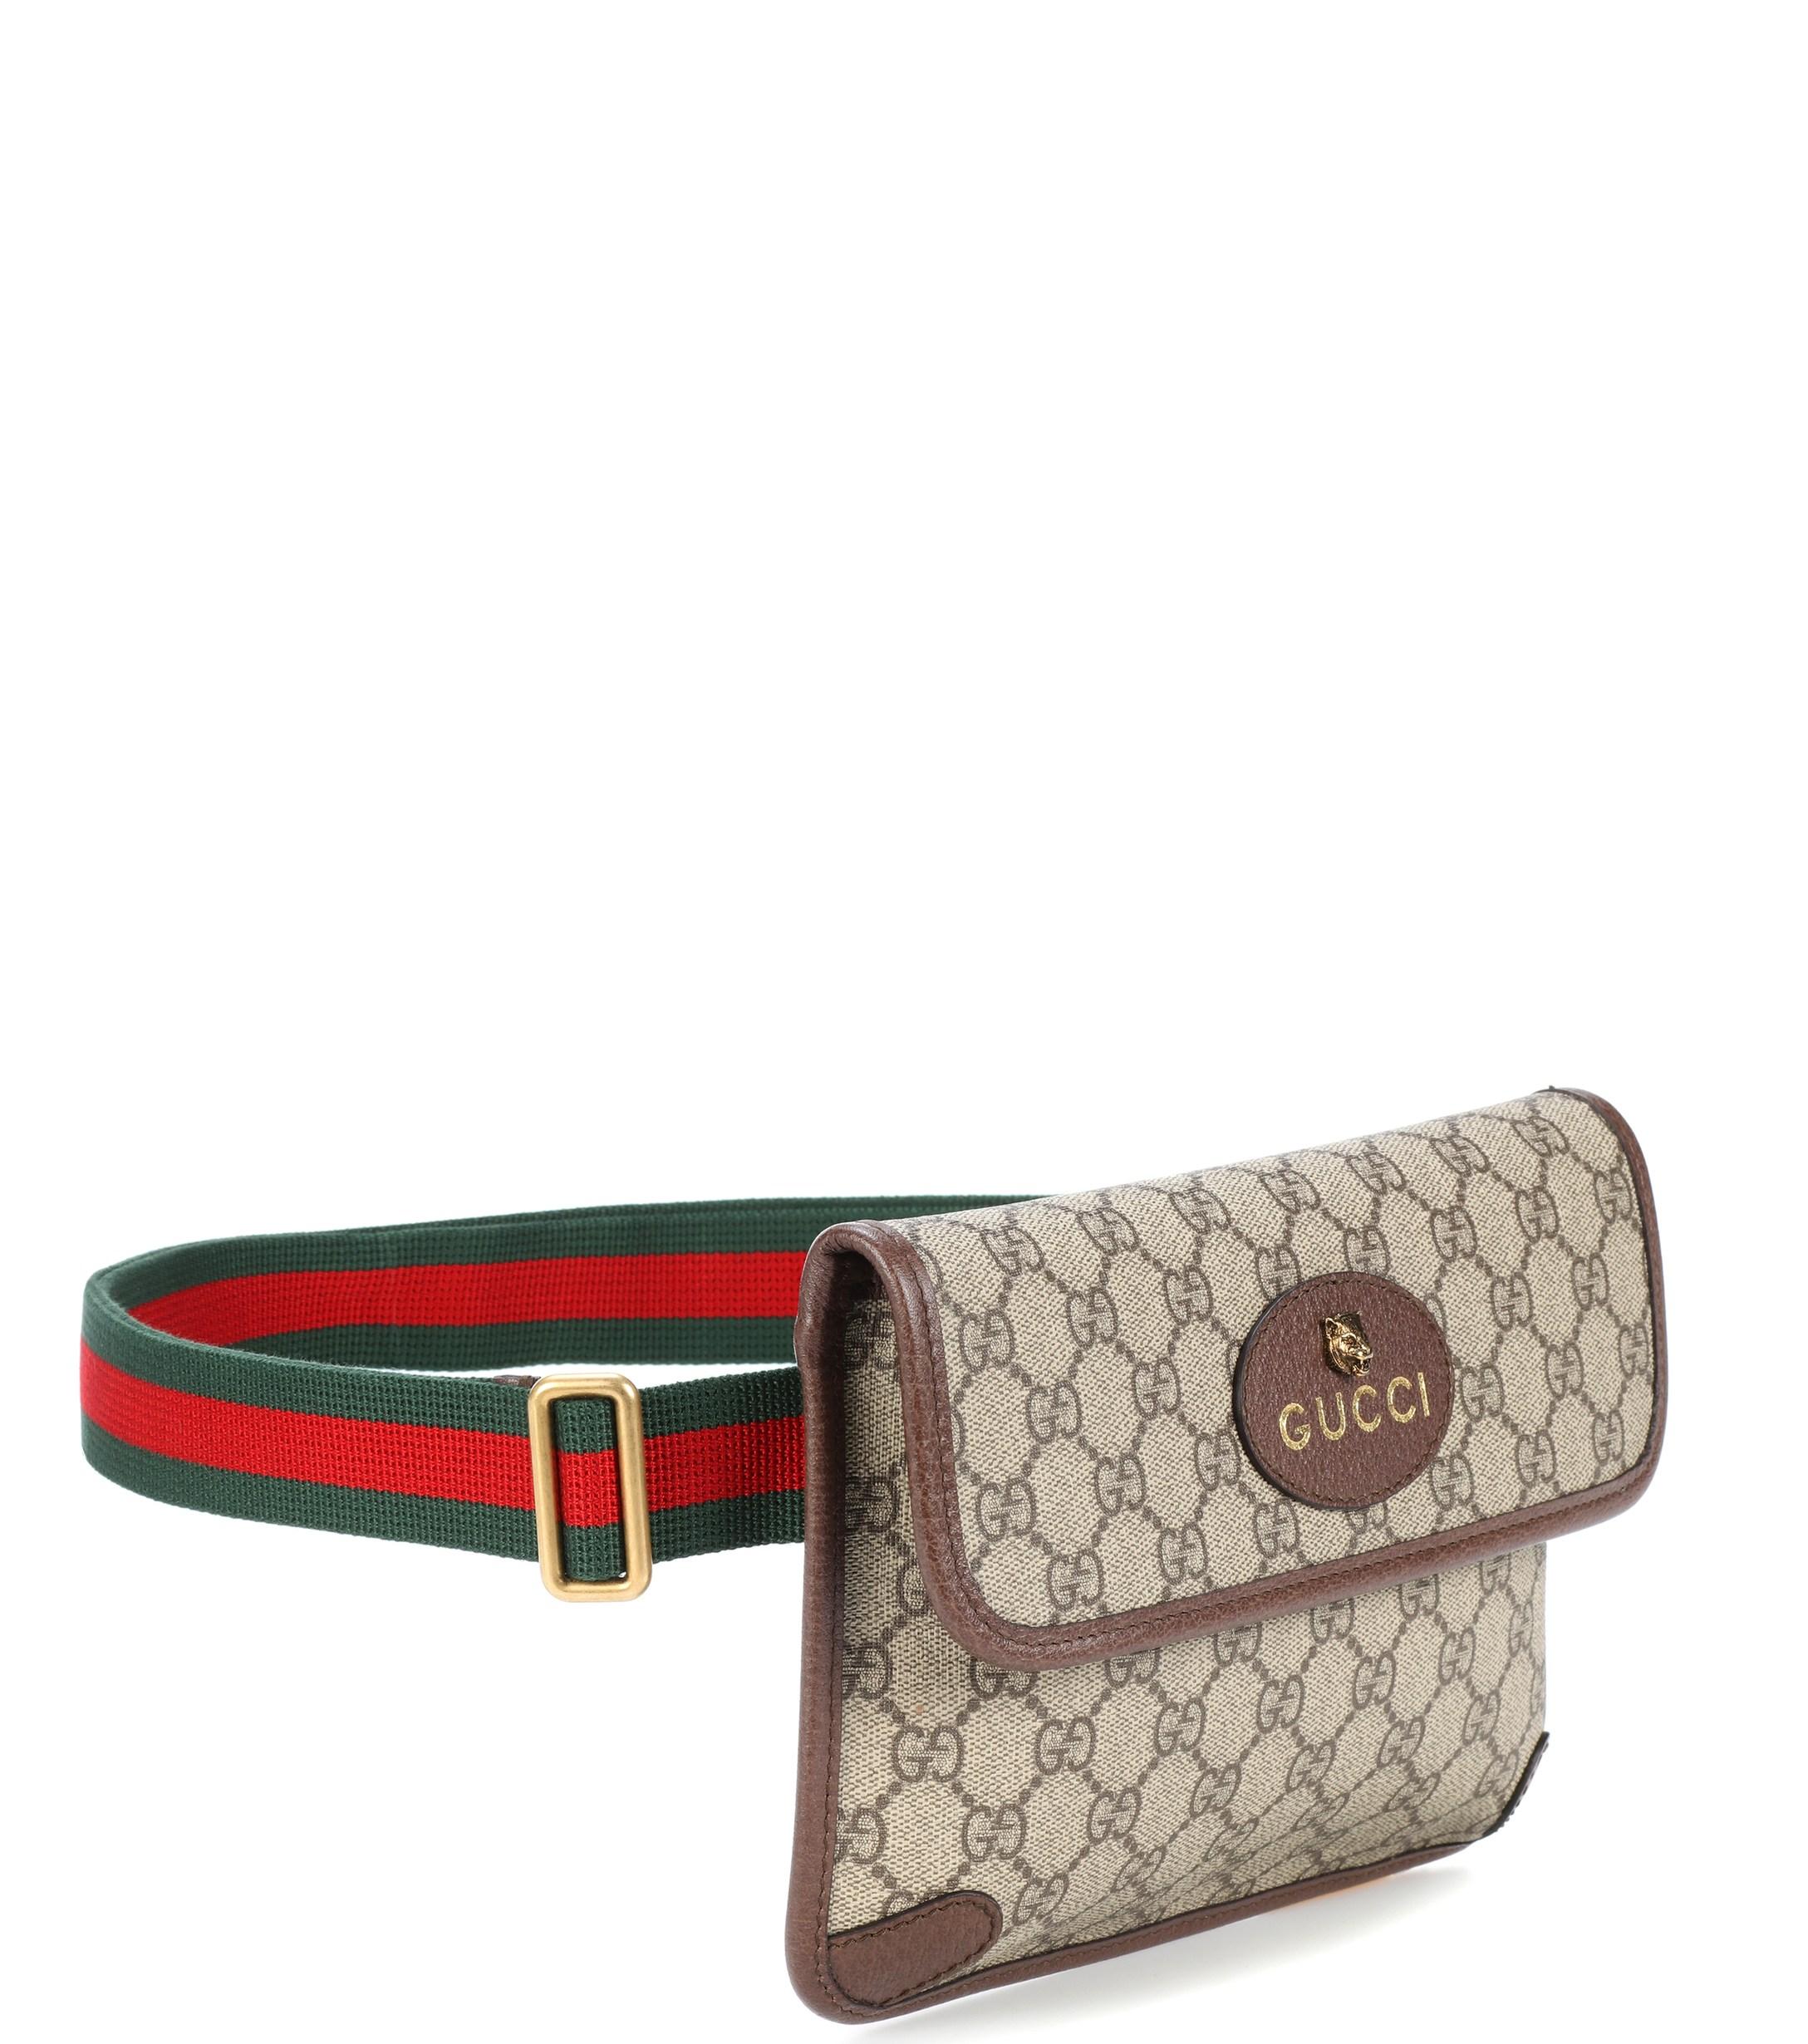 Gucci Leather-trimmed Belt Bag in Brown - Lyst